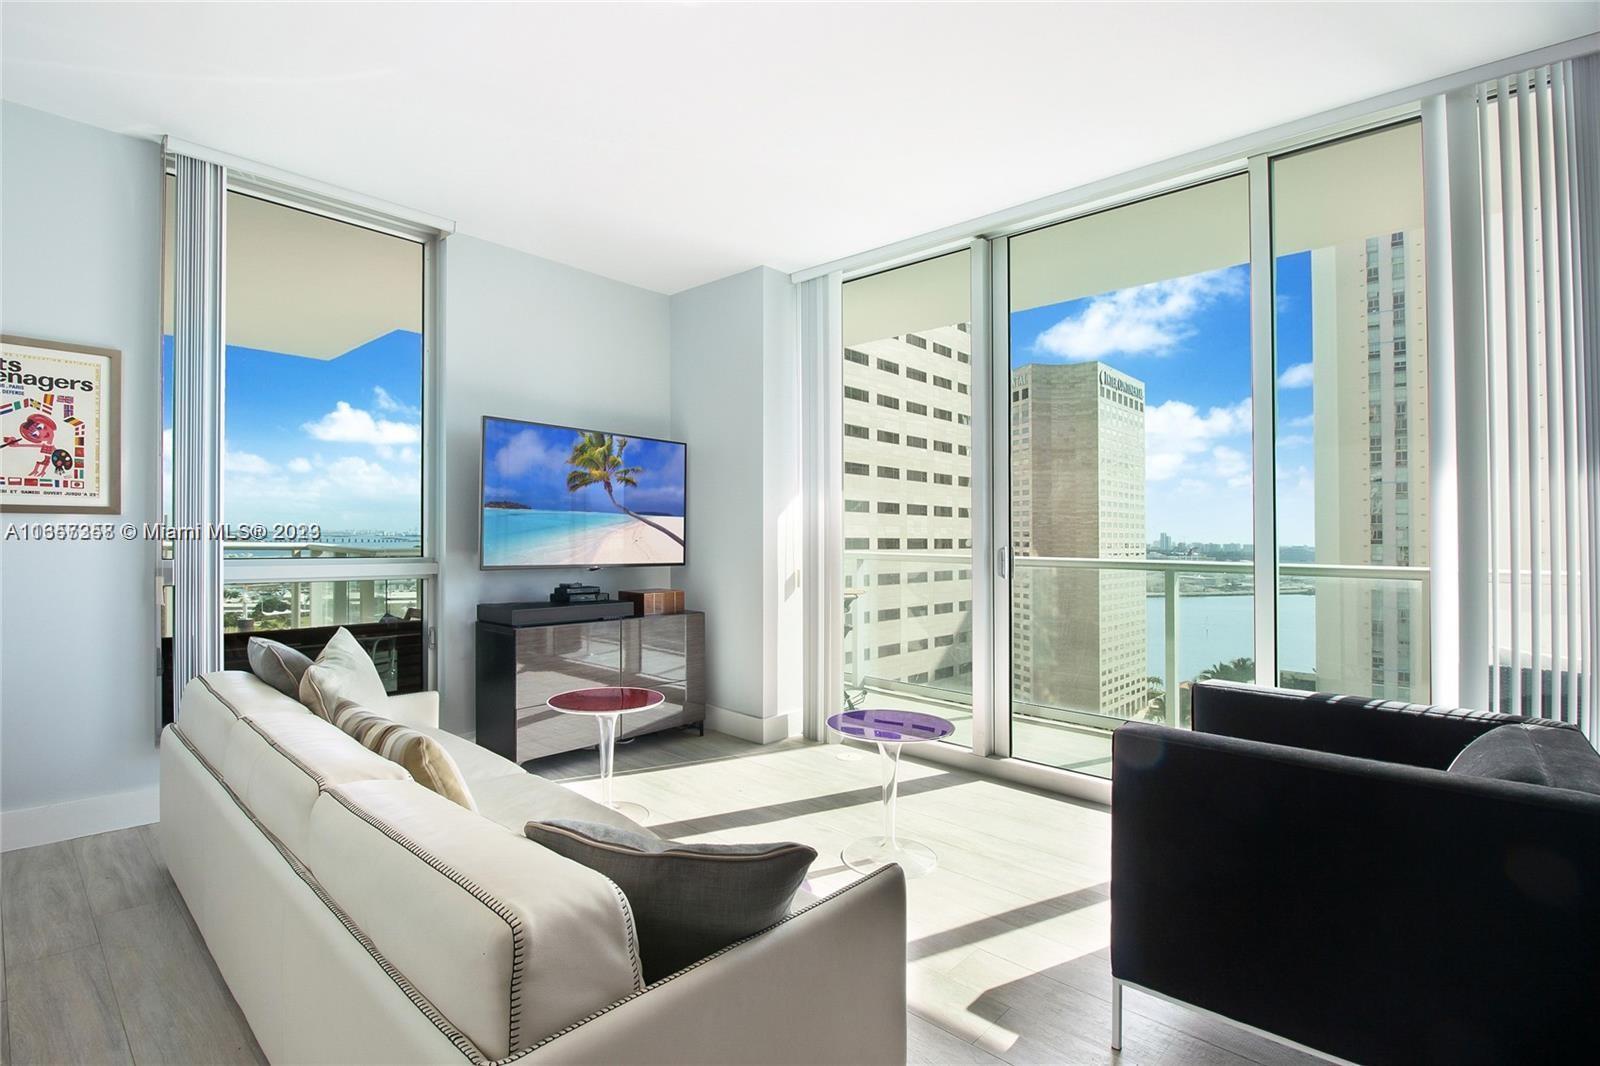 Fabulous water and city views from this spacious 2 Bedroom/2 bath split plan, corner unit. Tile floo